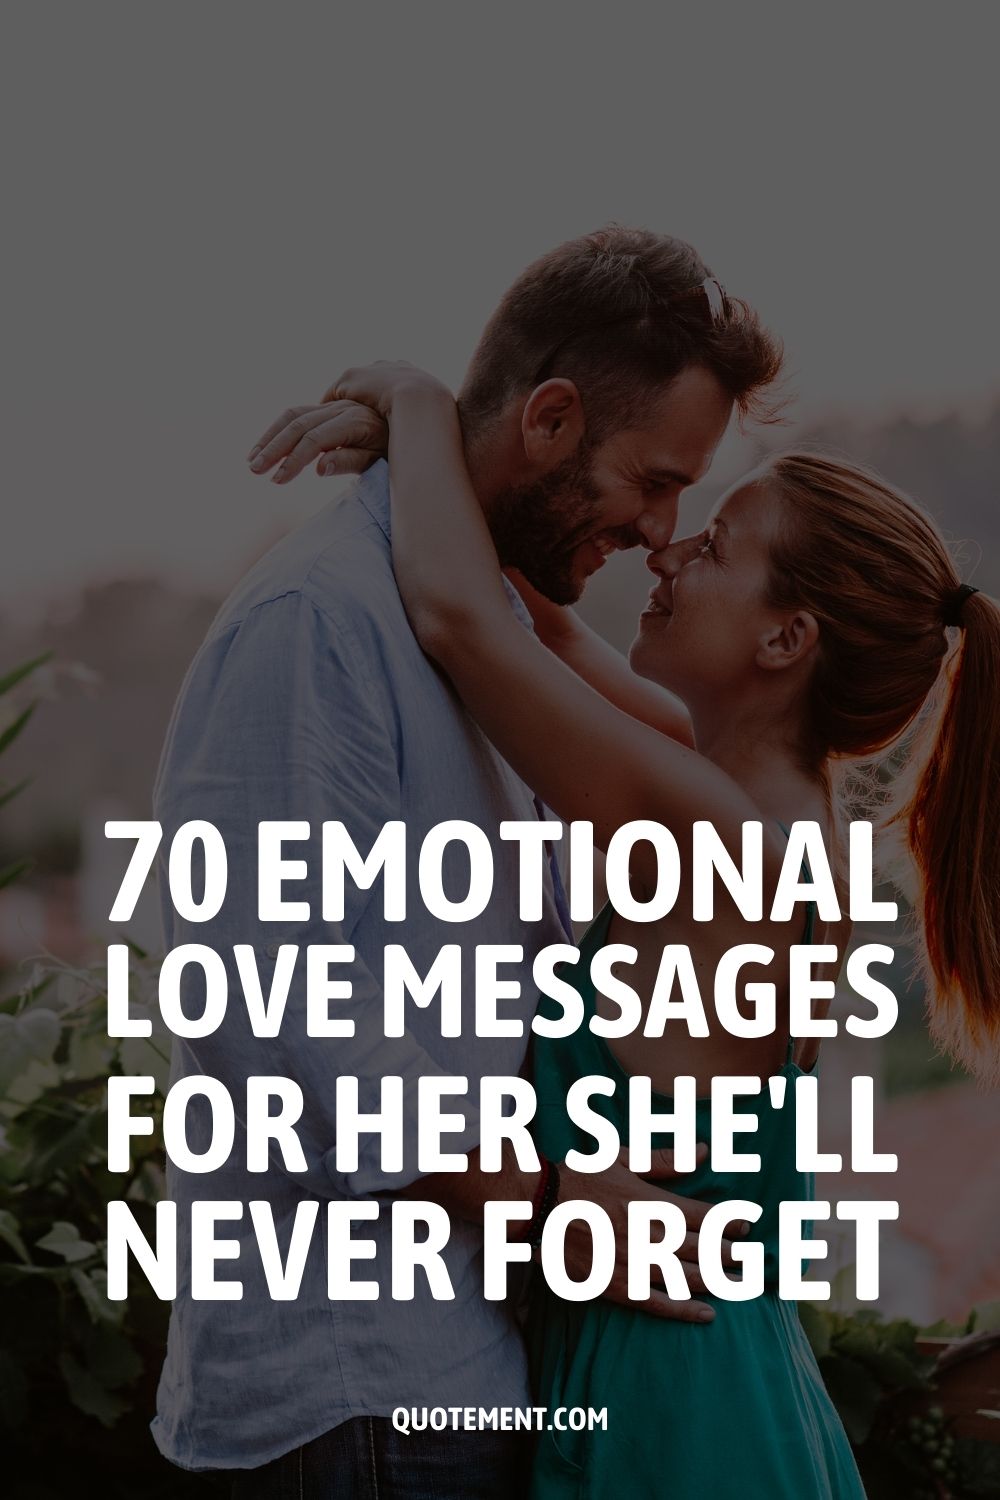 70 Emotional Love Messages For Her She'll Never Forget
